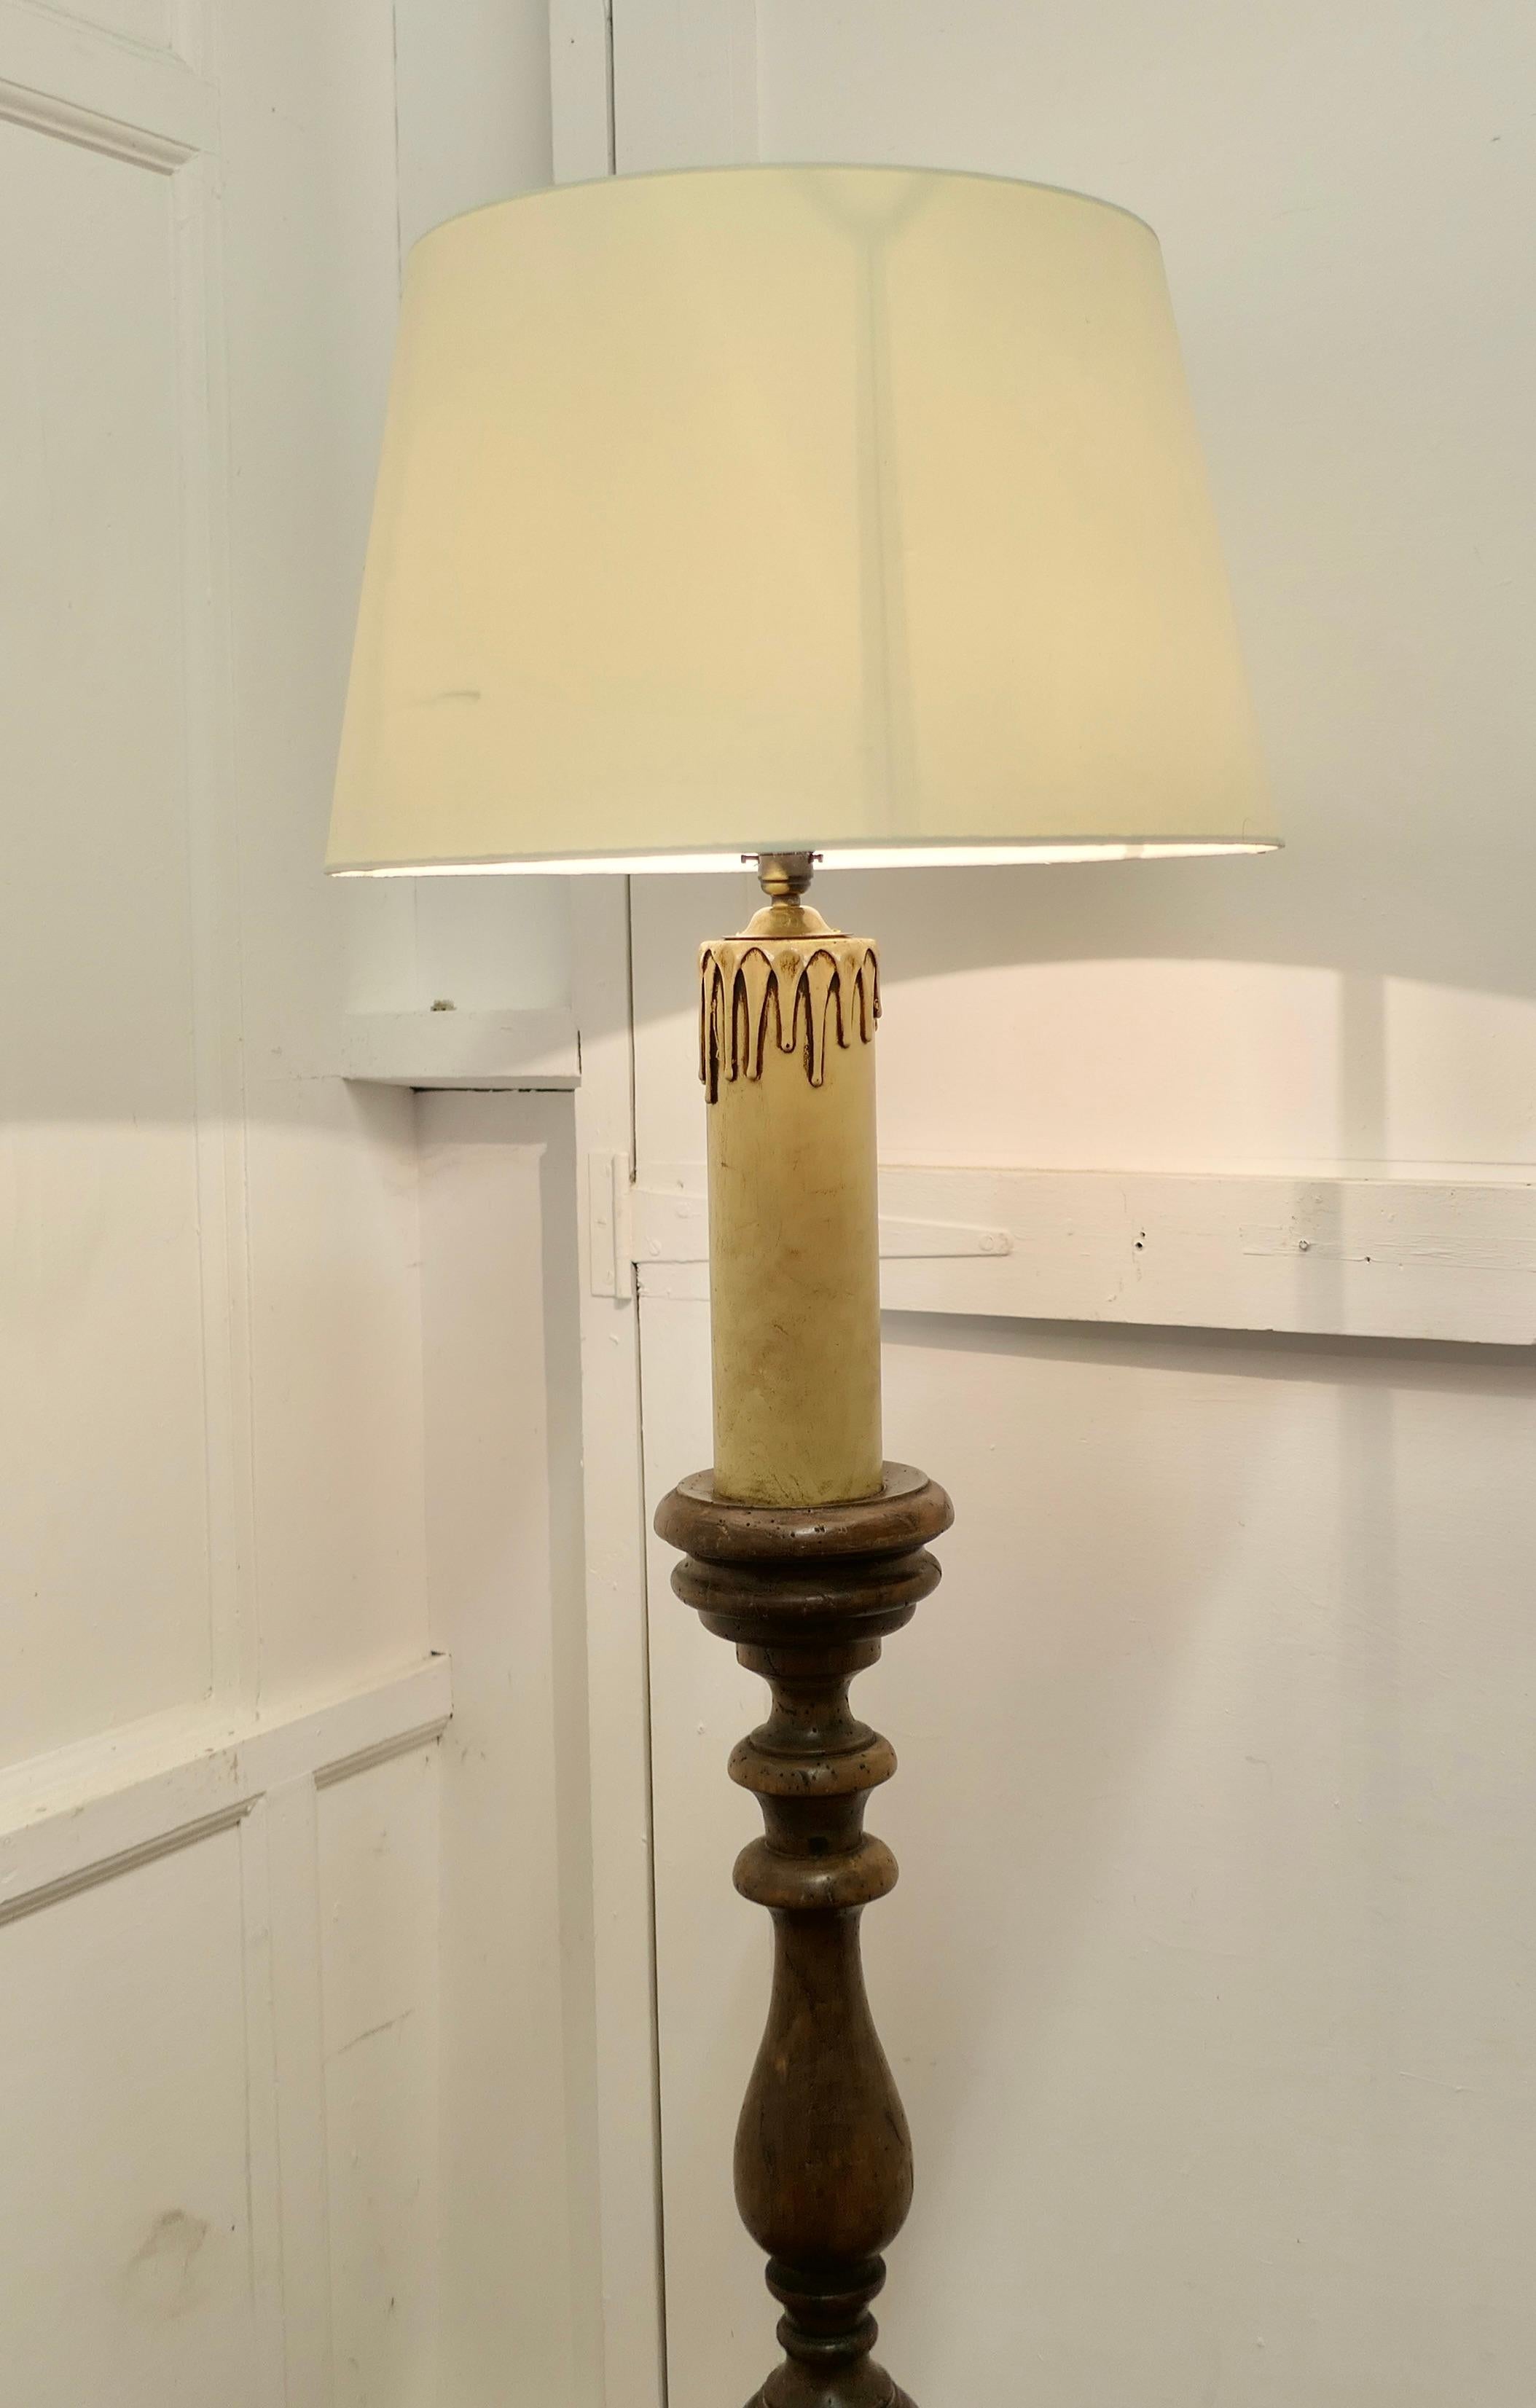 Chunky French Chestnut Standard Floor Lamp   This lamp is a good country piece  3